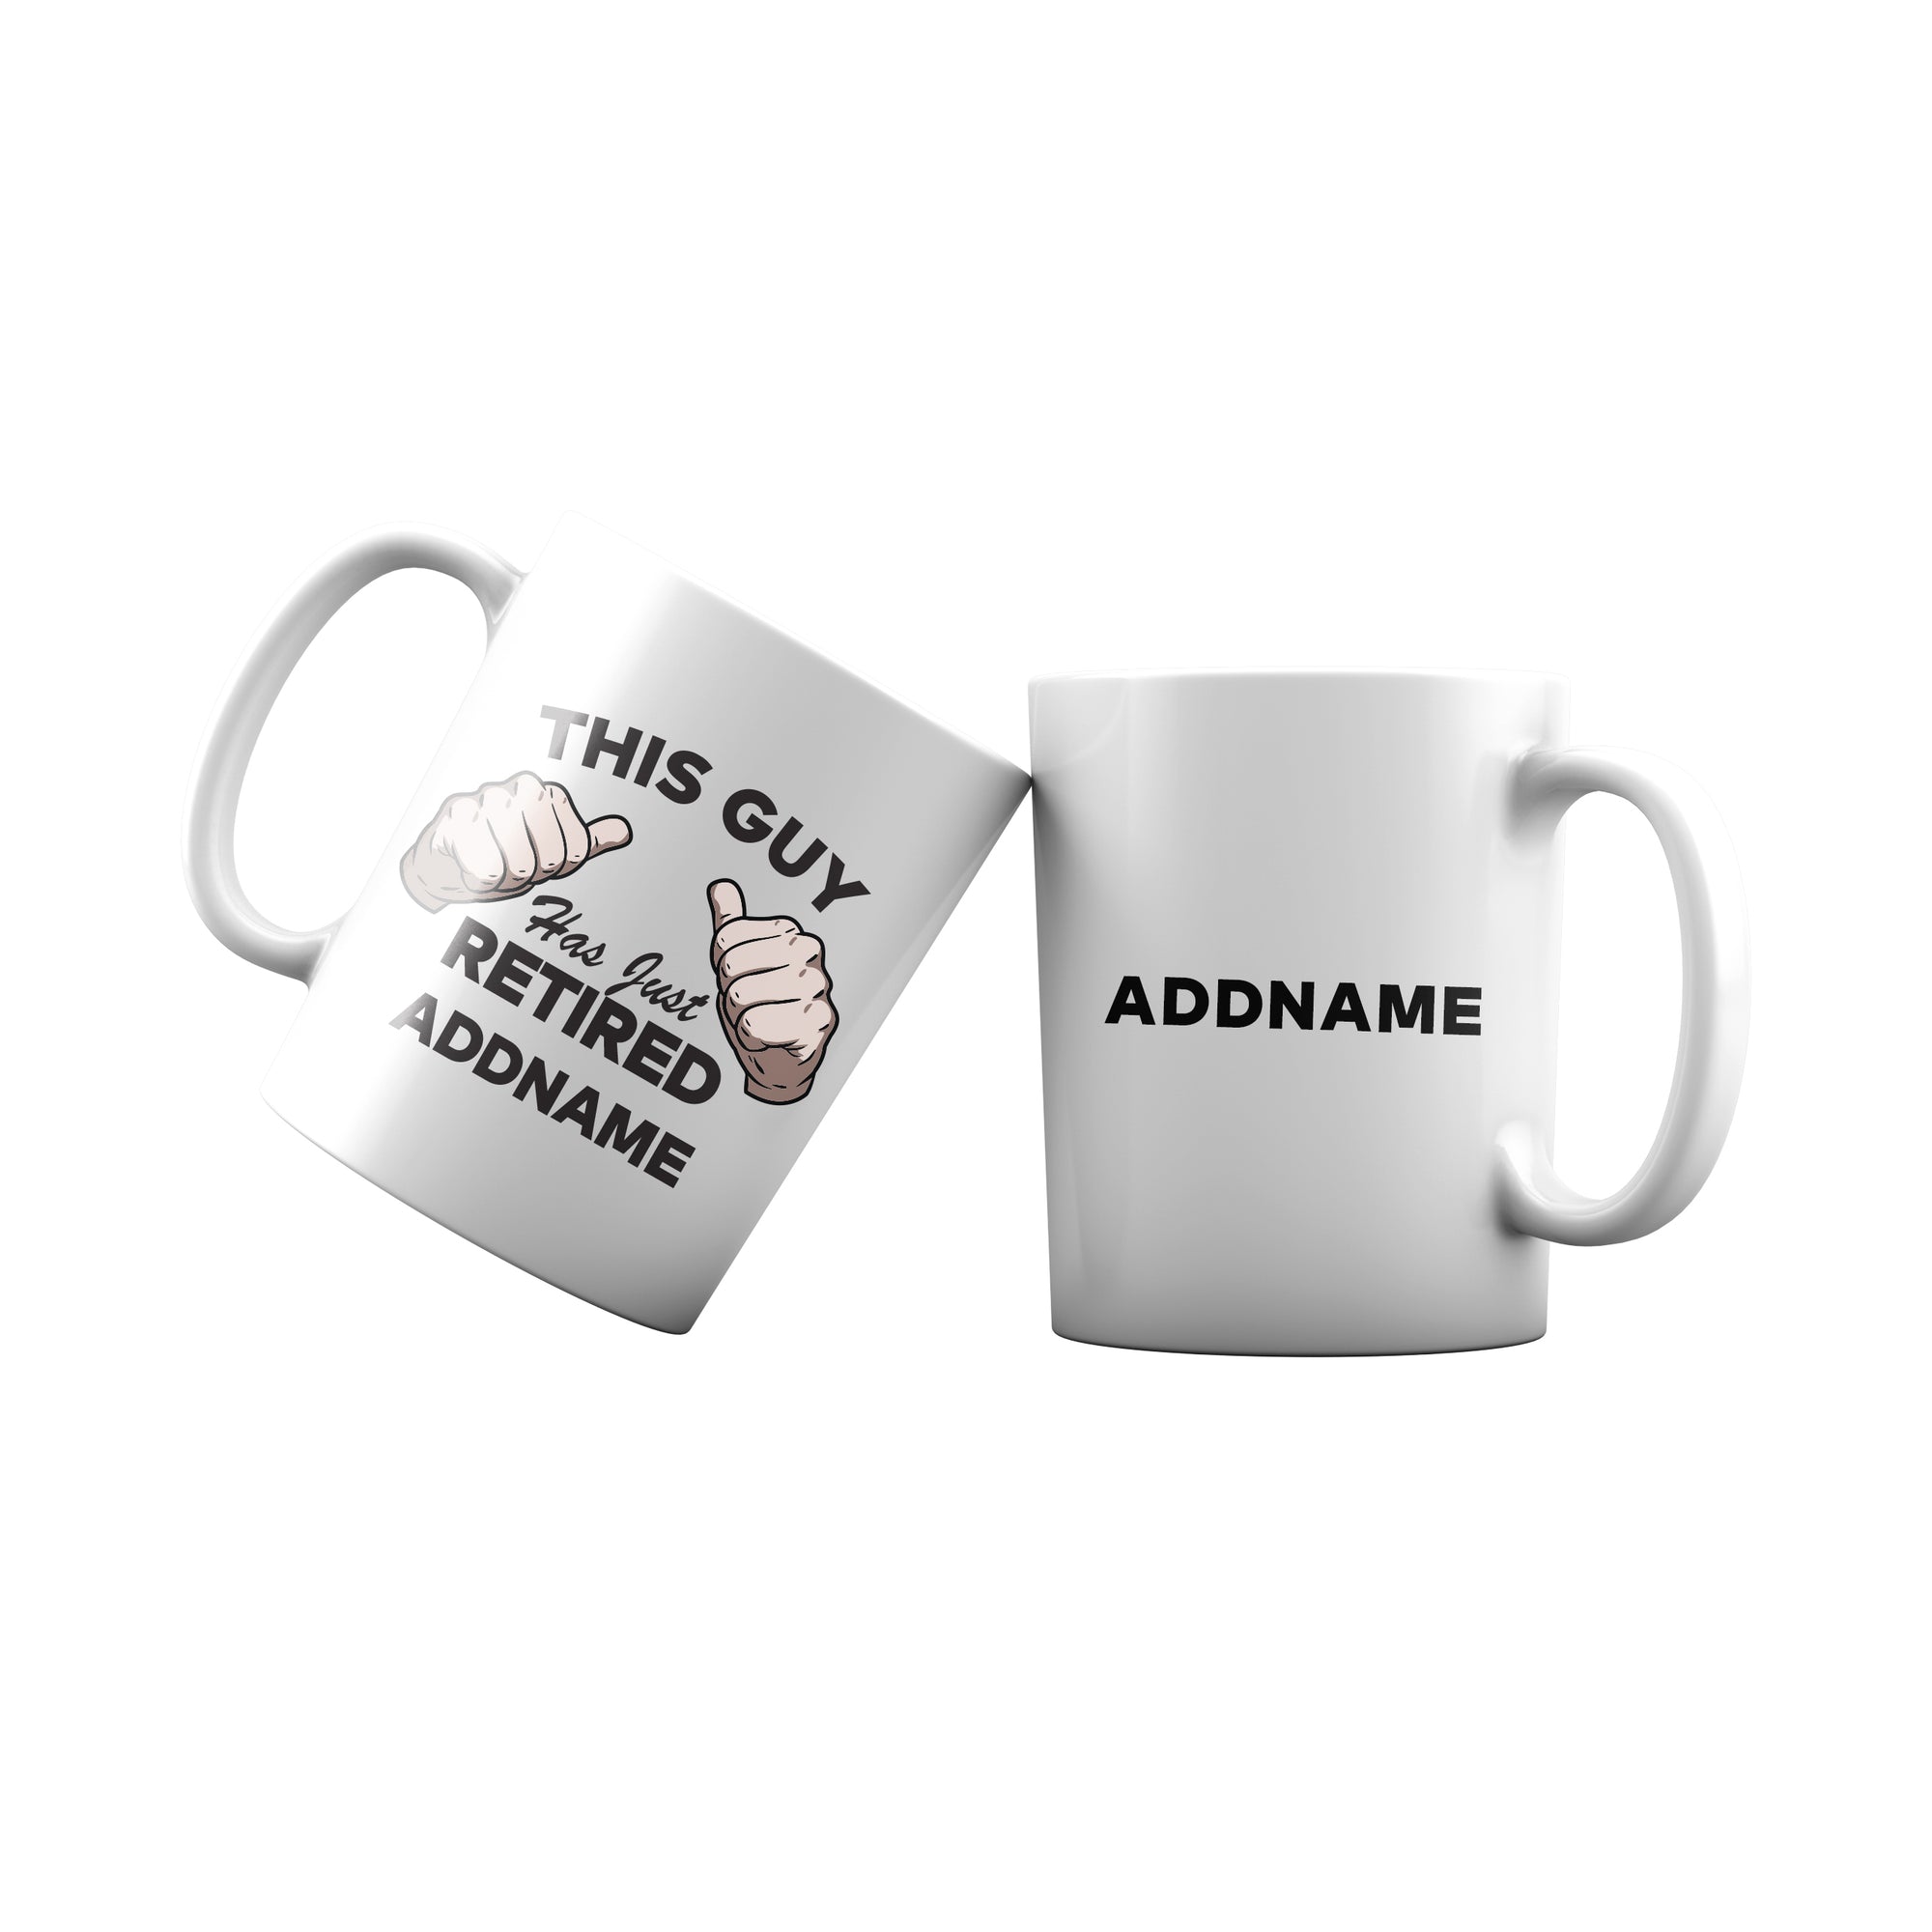 This Guy Has Just Retired Addname Mug